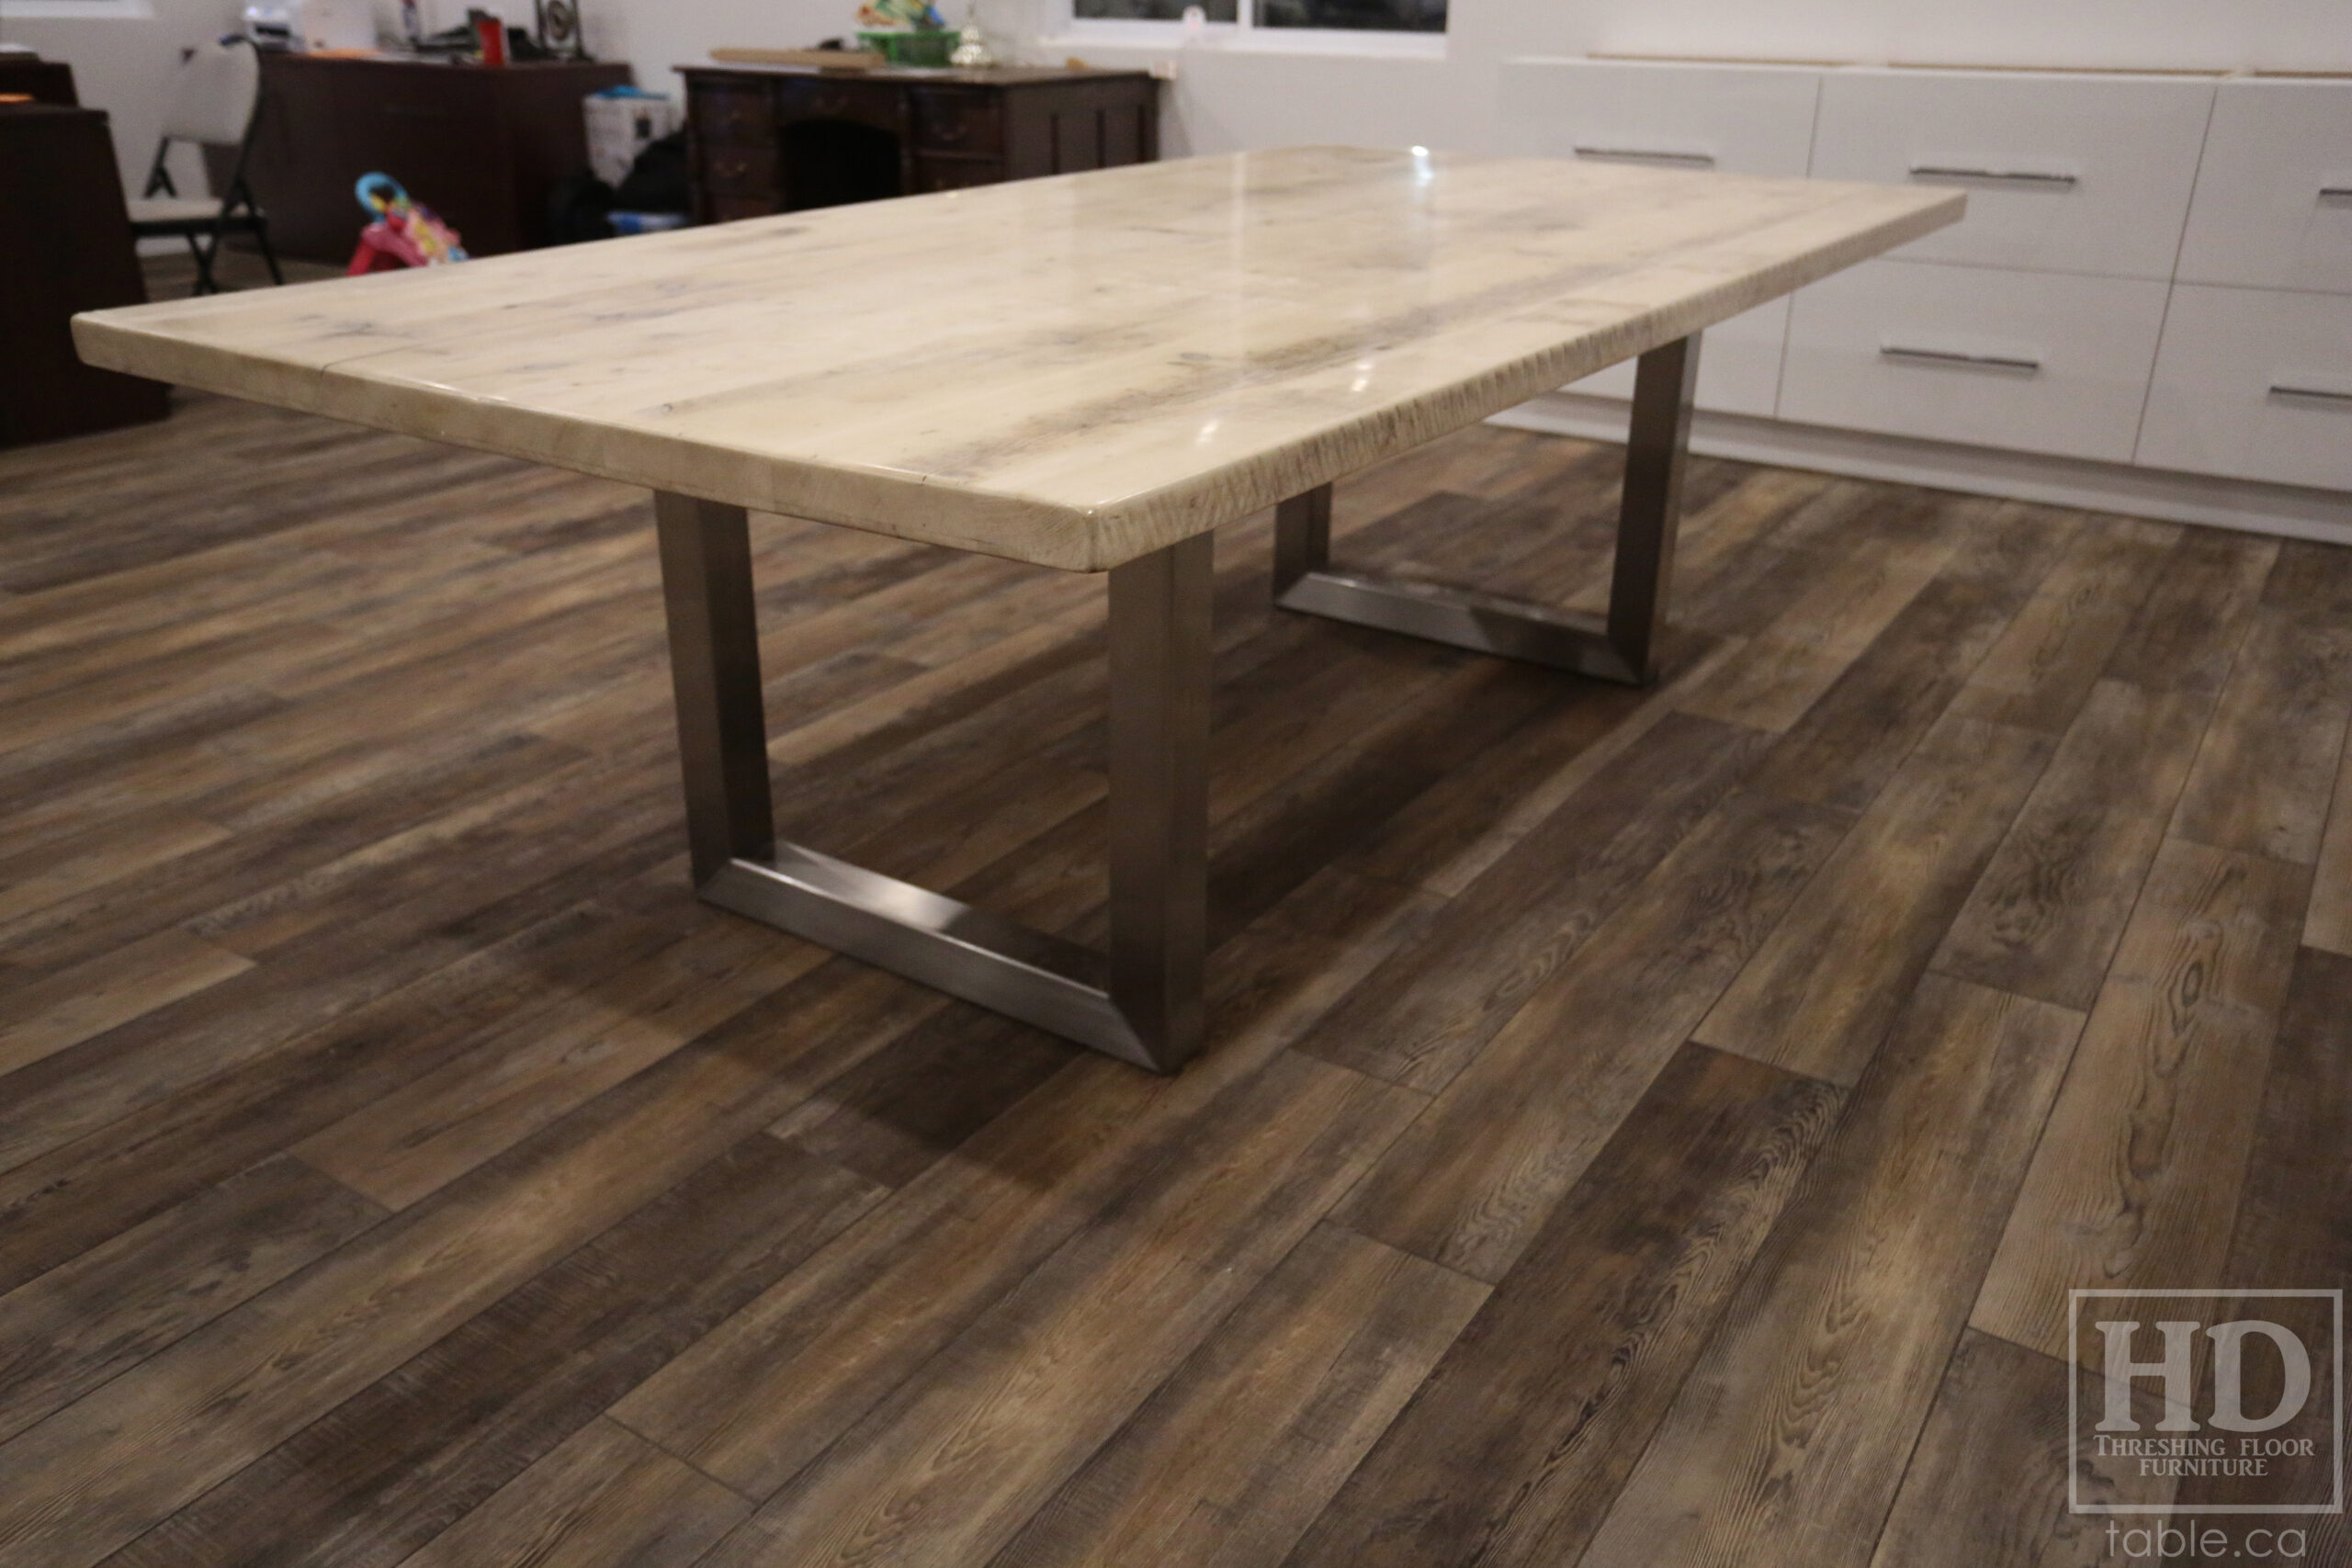 Project details: 8' Ontario Barnwood Boardroom Table - 48" wide – Stainless Steel U Shaped Base – Reclaimed Old Growth Hemlock Threshing Floor Construction – No bread-edge boards - Original edges & distressing maintained – Bleached Option - Premium epoxy + satin polyurethane finish - www.table.ca